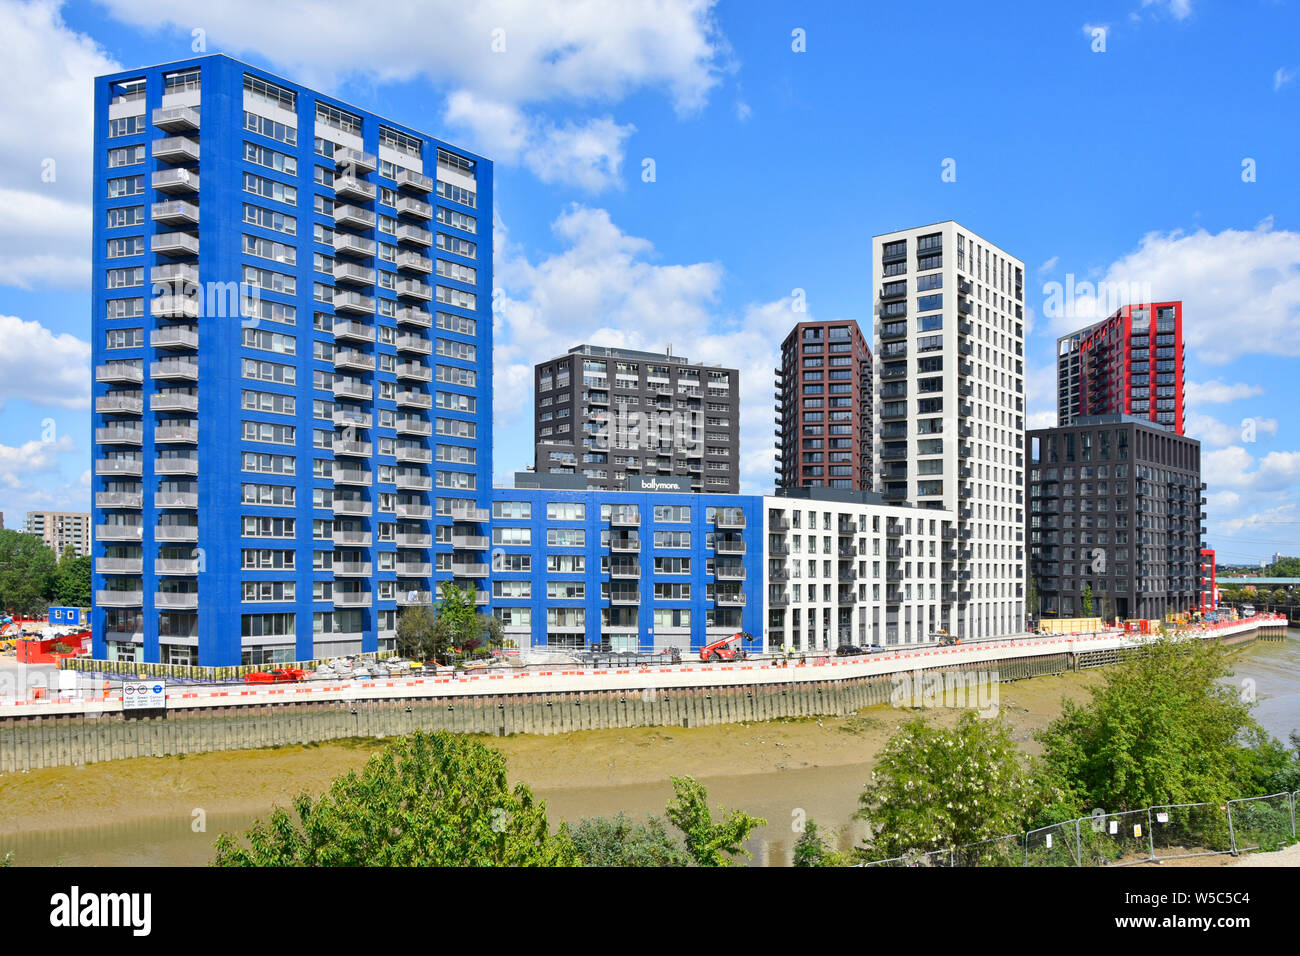 Apartment blocks new homes & offices in urban landscape River Lee creek City Island East London housing brownfield site development Canning Town UK Stock Photo